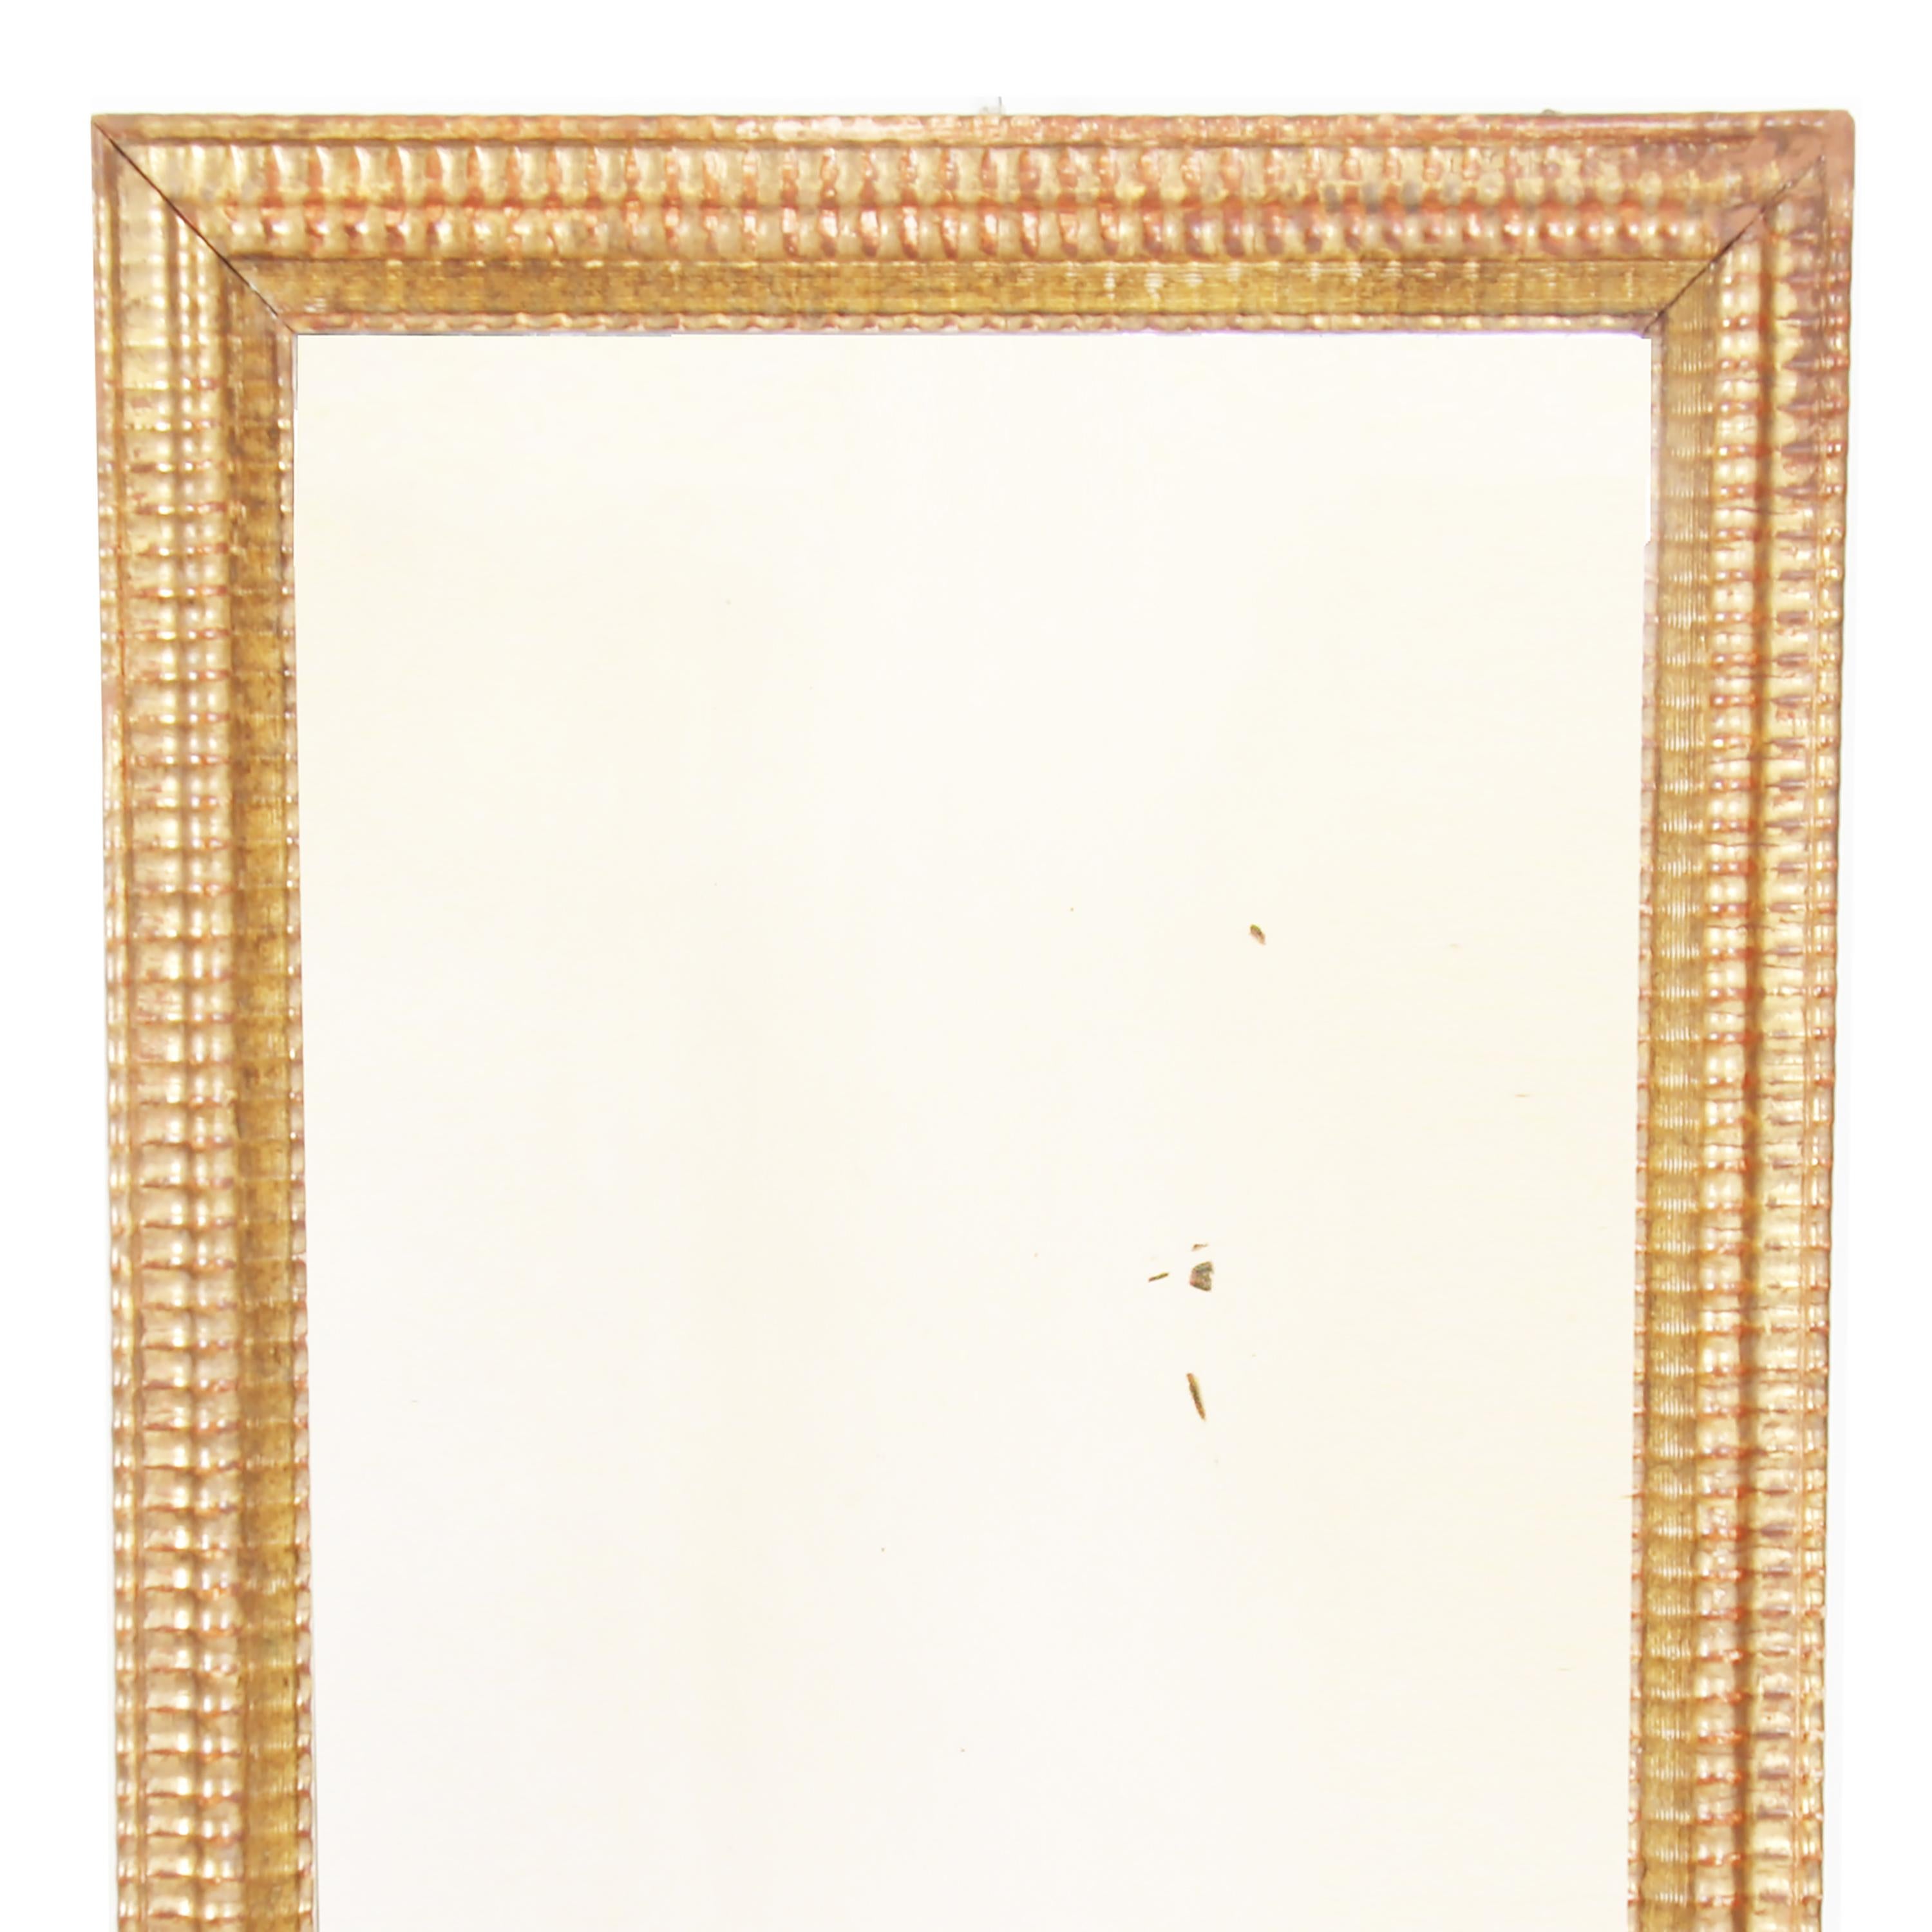 French 19th century, giltwood mirror with a ripple design frame. With original mercury glass, this is a beautiful piece.